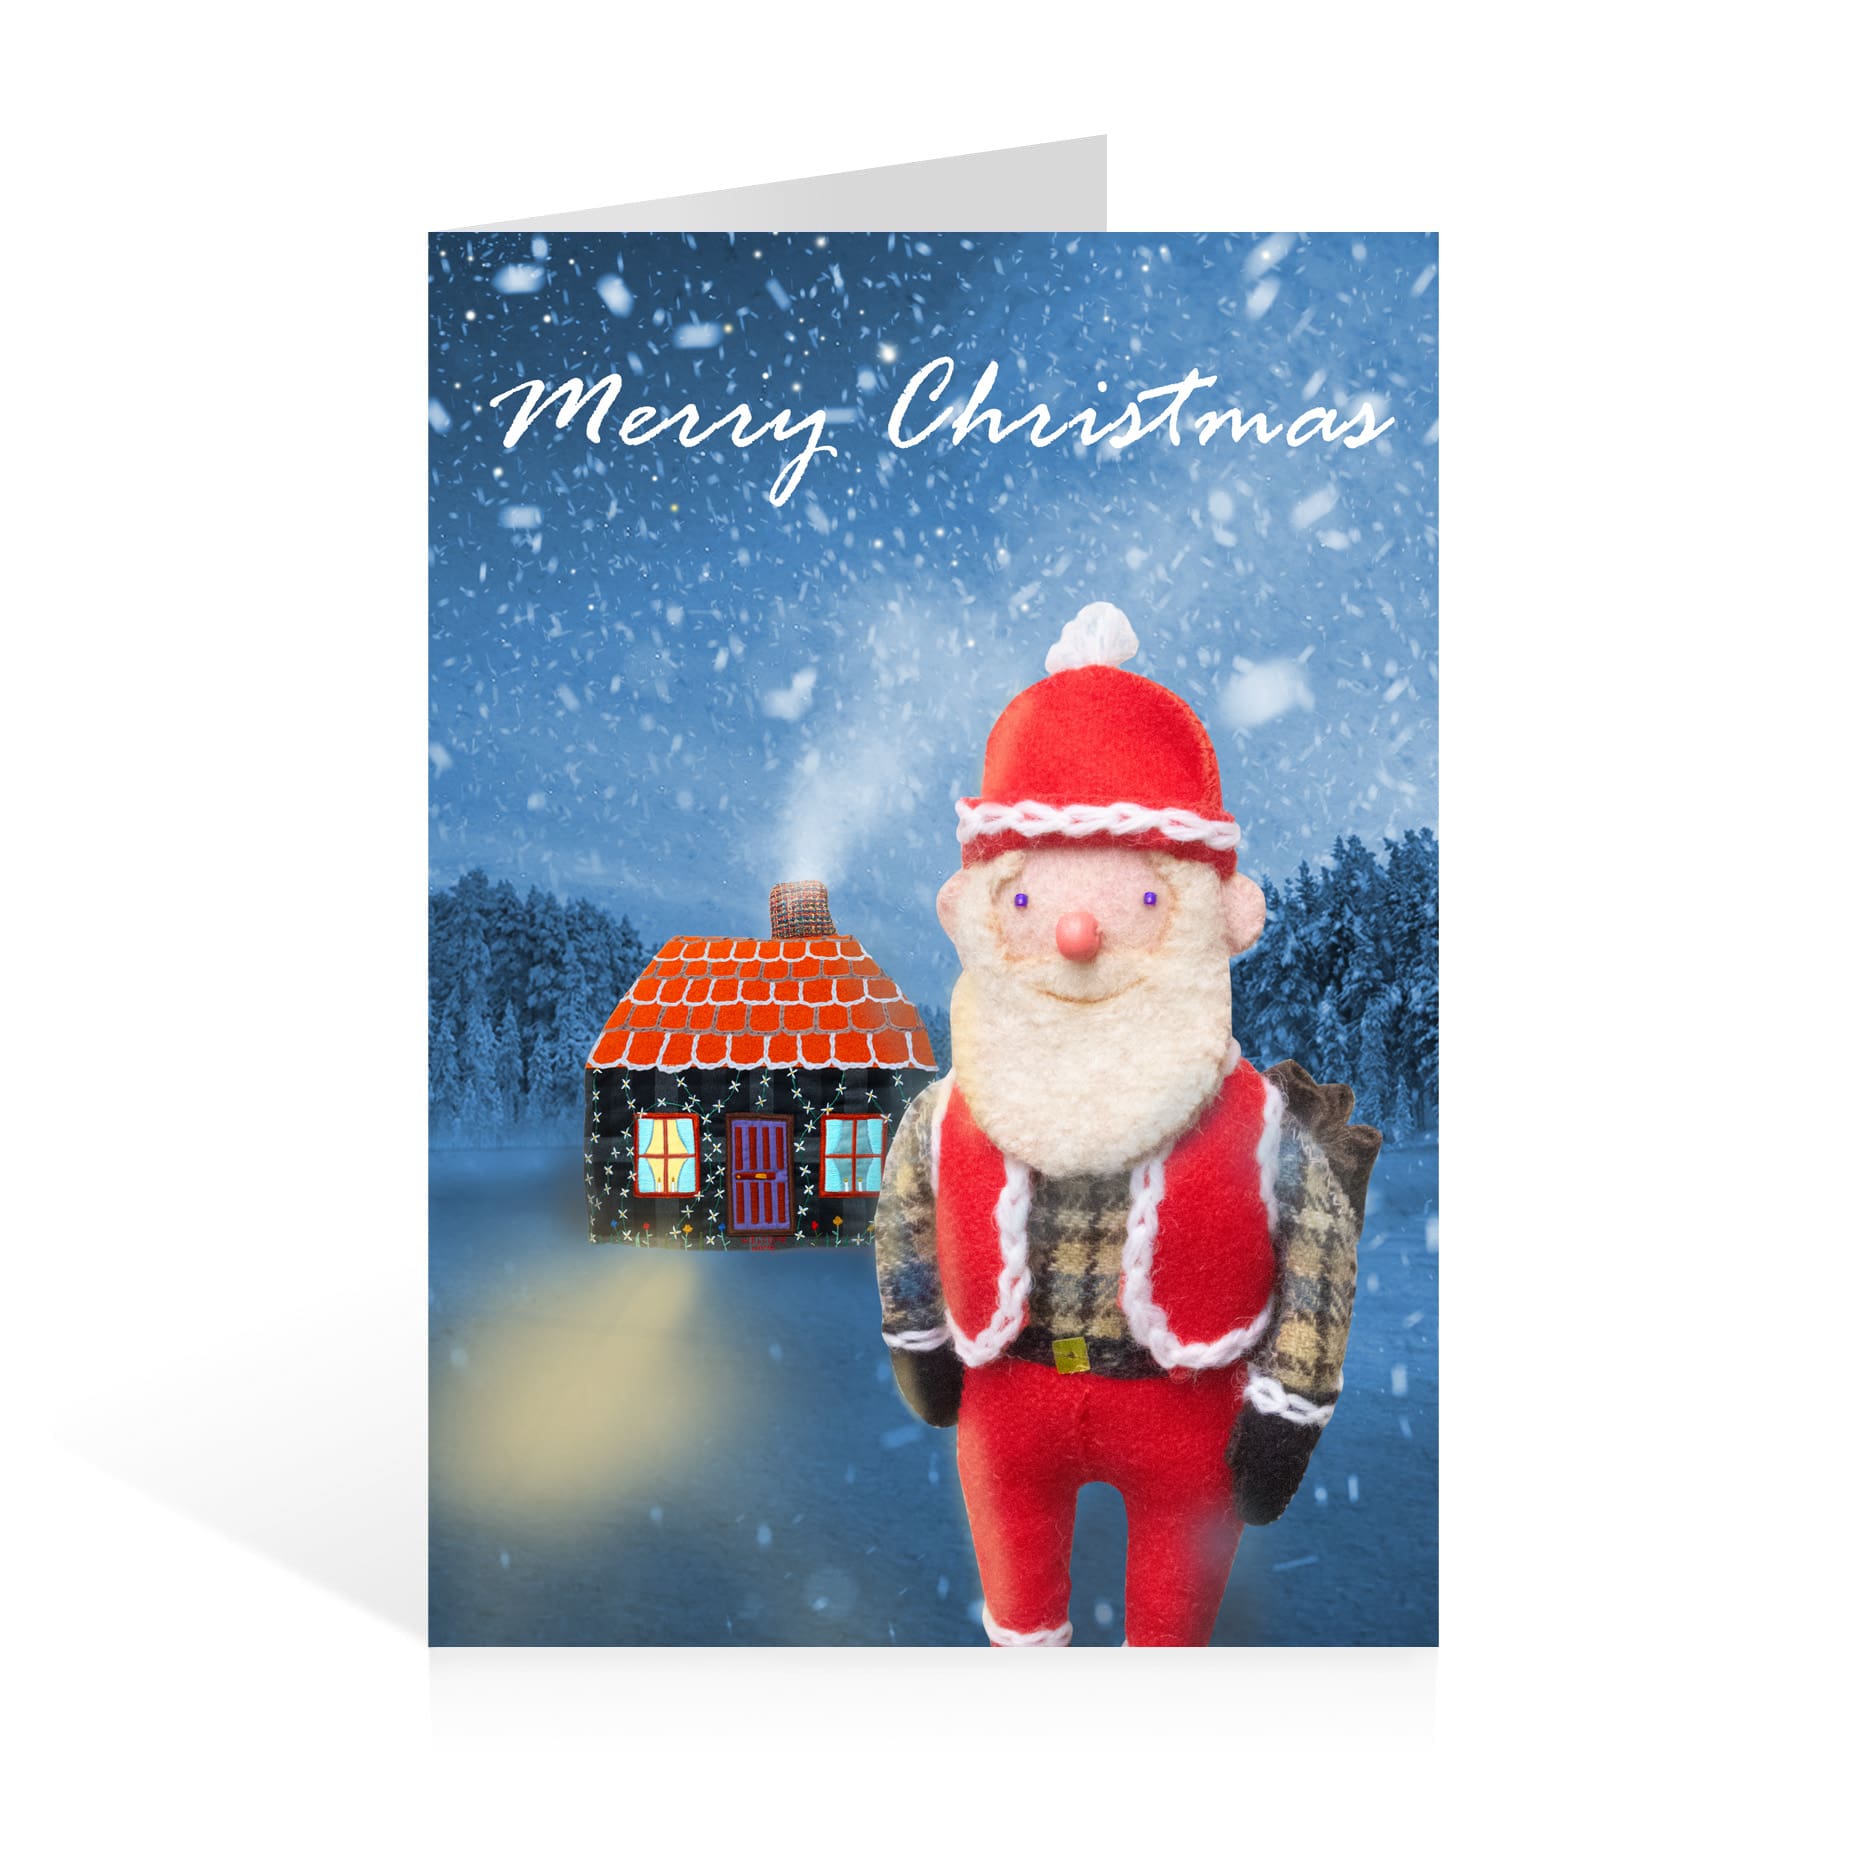 Fine-Cell-Work-charity-christmas-cards-pack-of-5-tea-cosy-hipster-father-christmas-jonquin-eden-Merry-Christmas.jpg